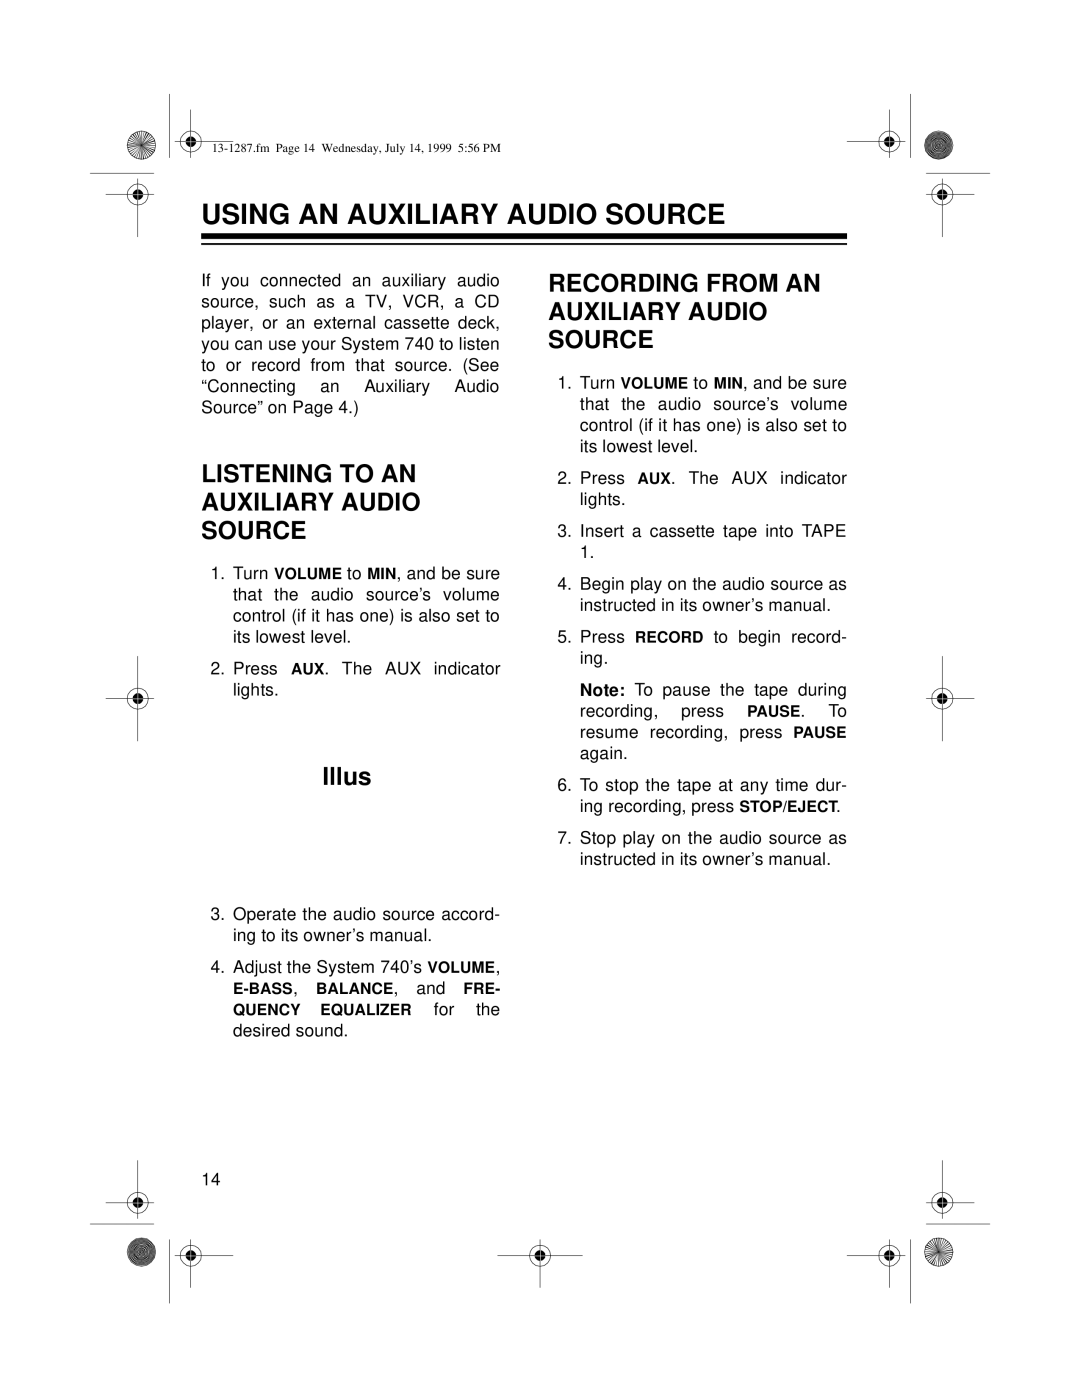 Optimus 740 owner manual Using An Auxiliary Audio Source, Listening To An Auxiliary Audio Source, Illus 